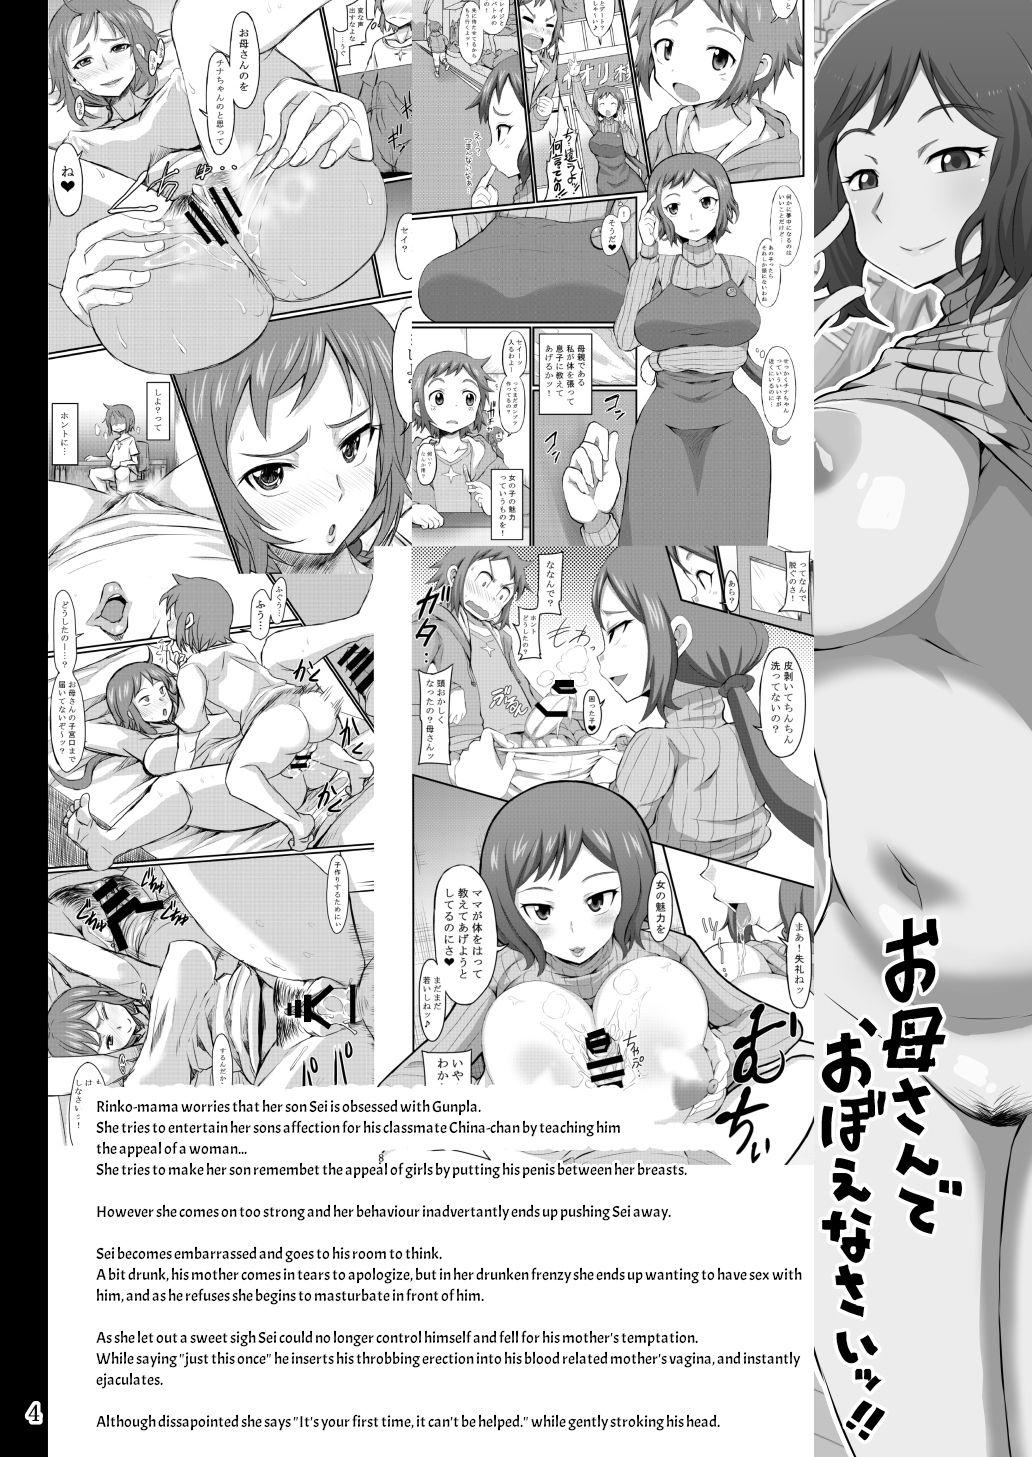 Russian Okaa-san to Hagukumimasho | Let's grow up with mother - Gundam build fighters Amature Porn - Page 3